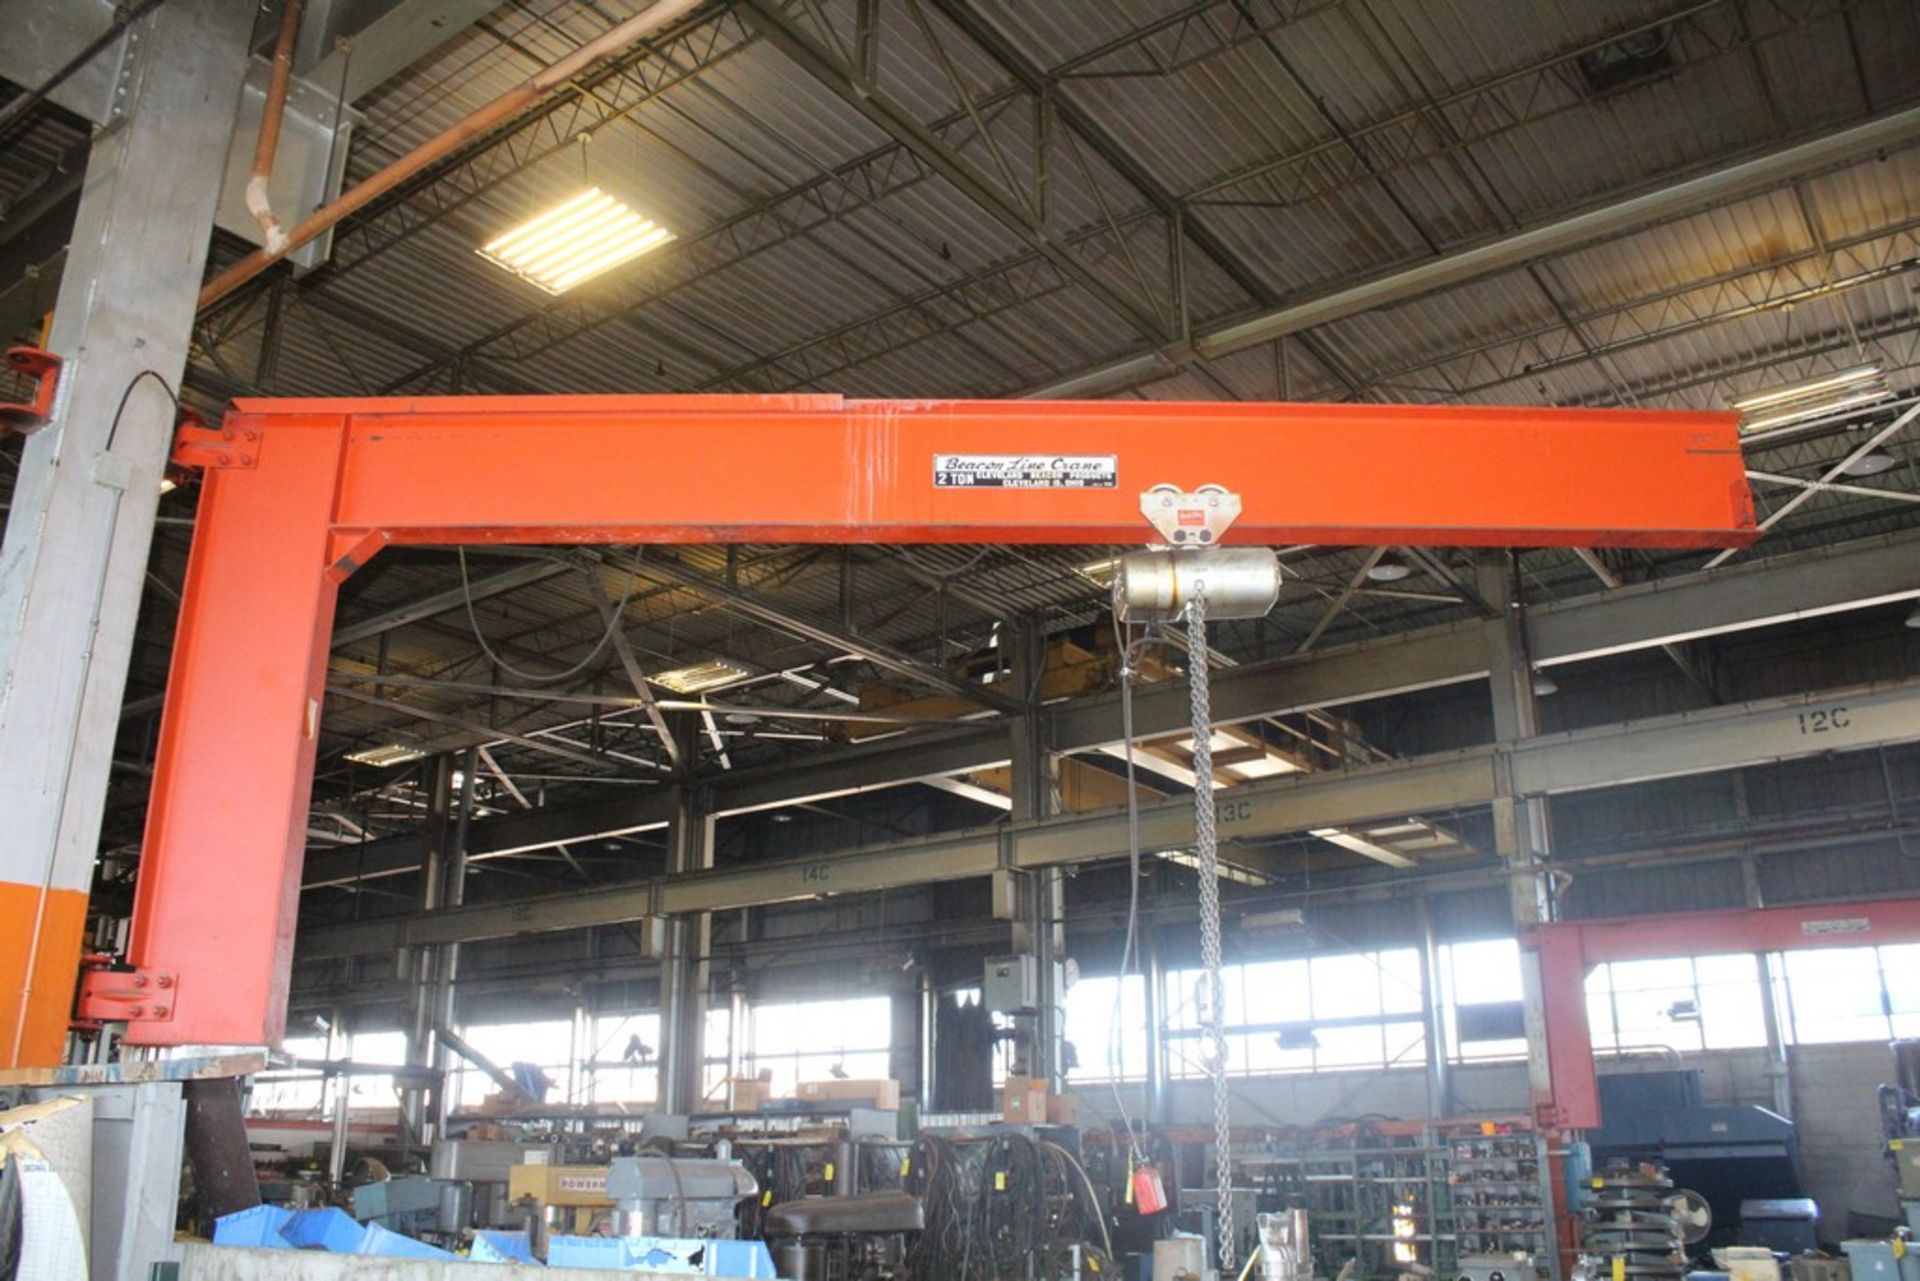 BEACON LINE JIB CRANE 16' ARM WITH CM LOAD STAR 2 TON ELECTRIC CHAIN HOIST, WIRED PENDANT CONTROL